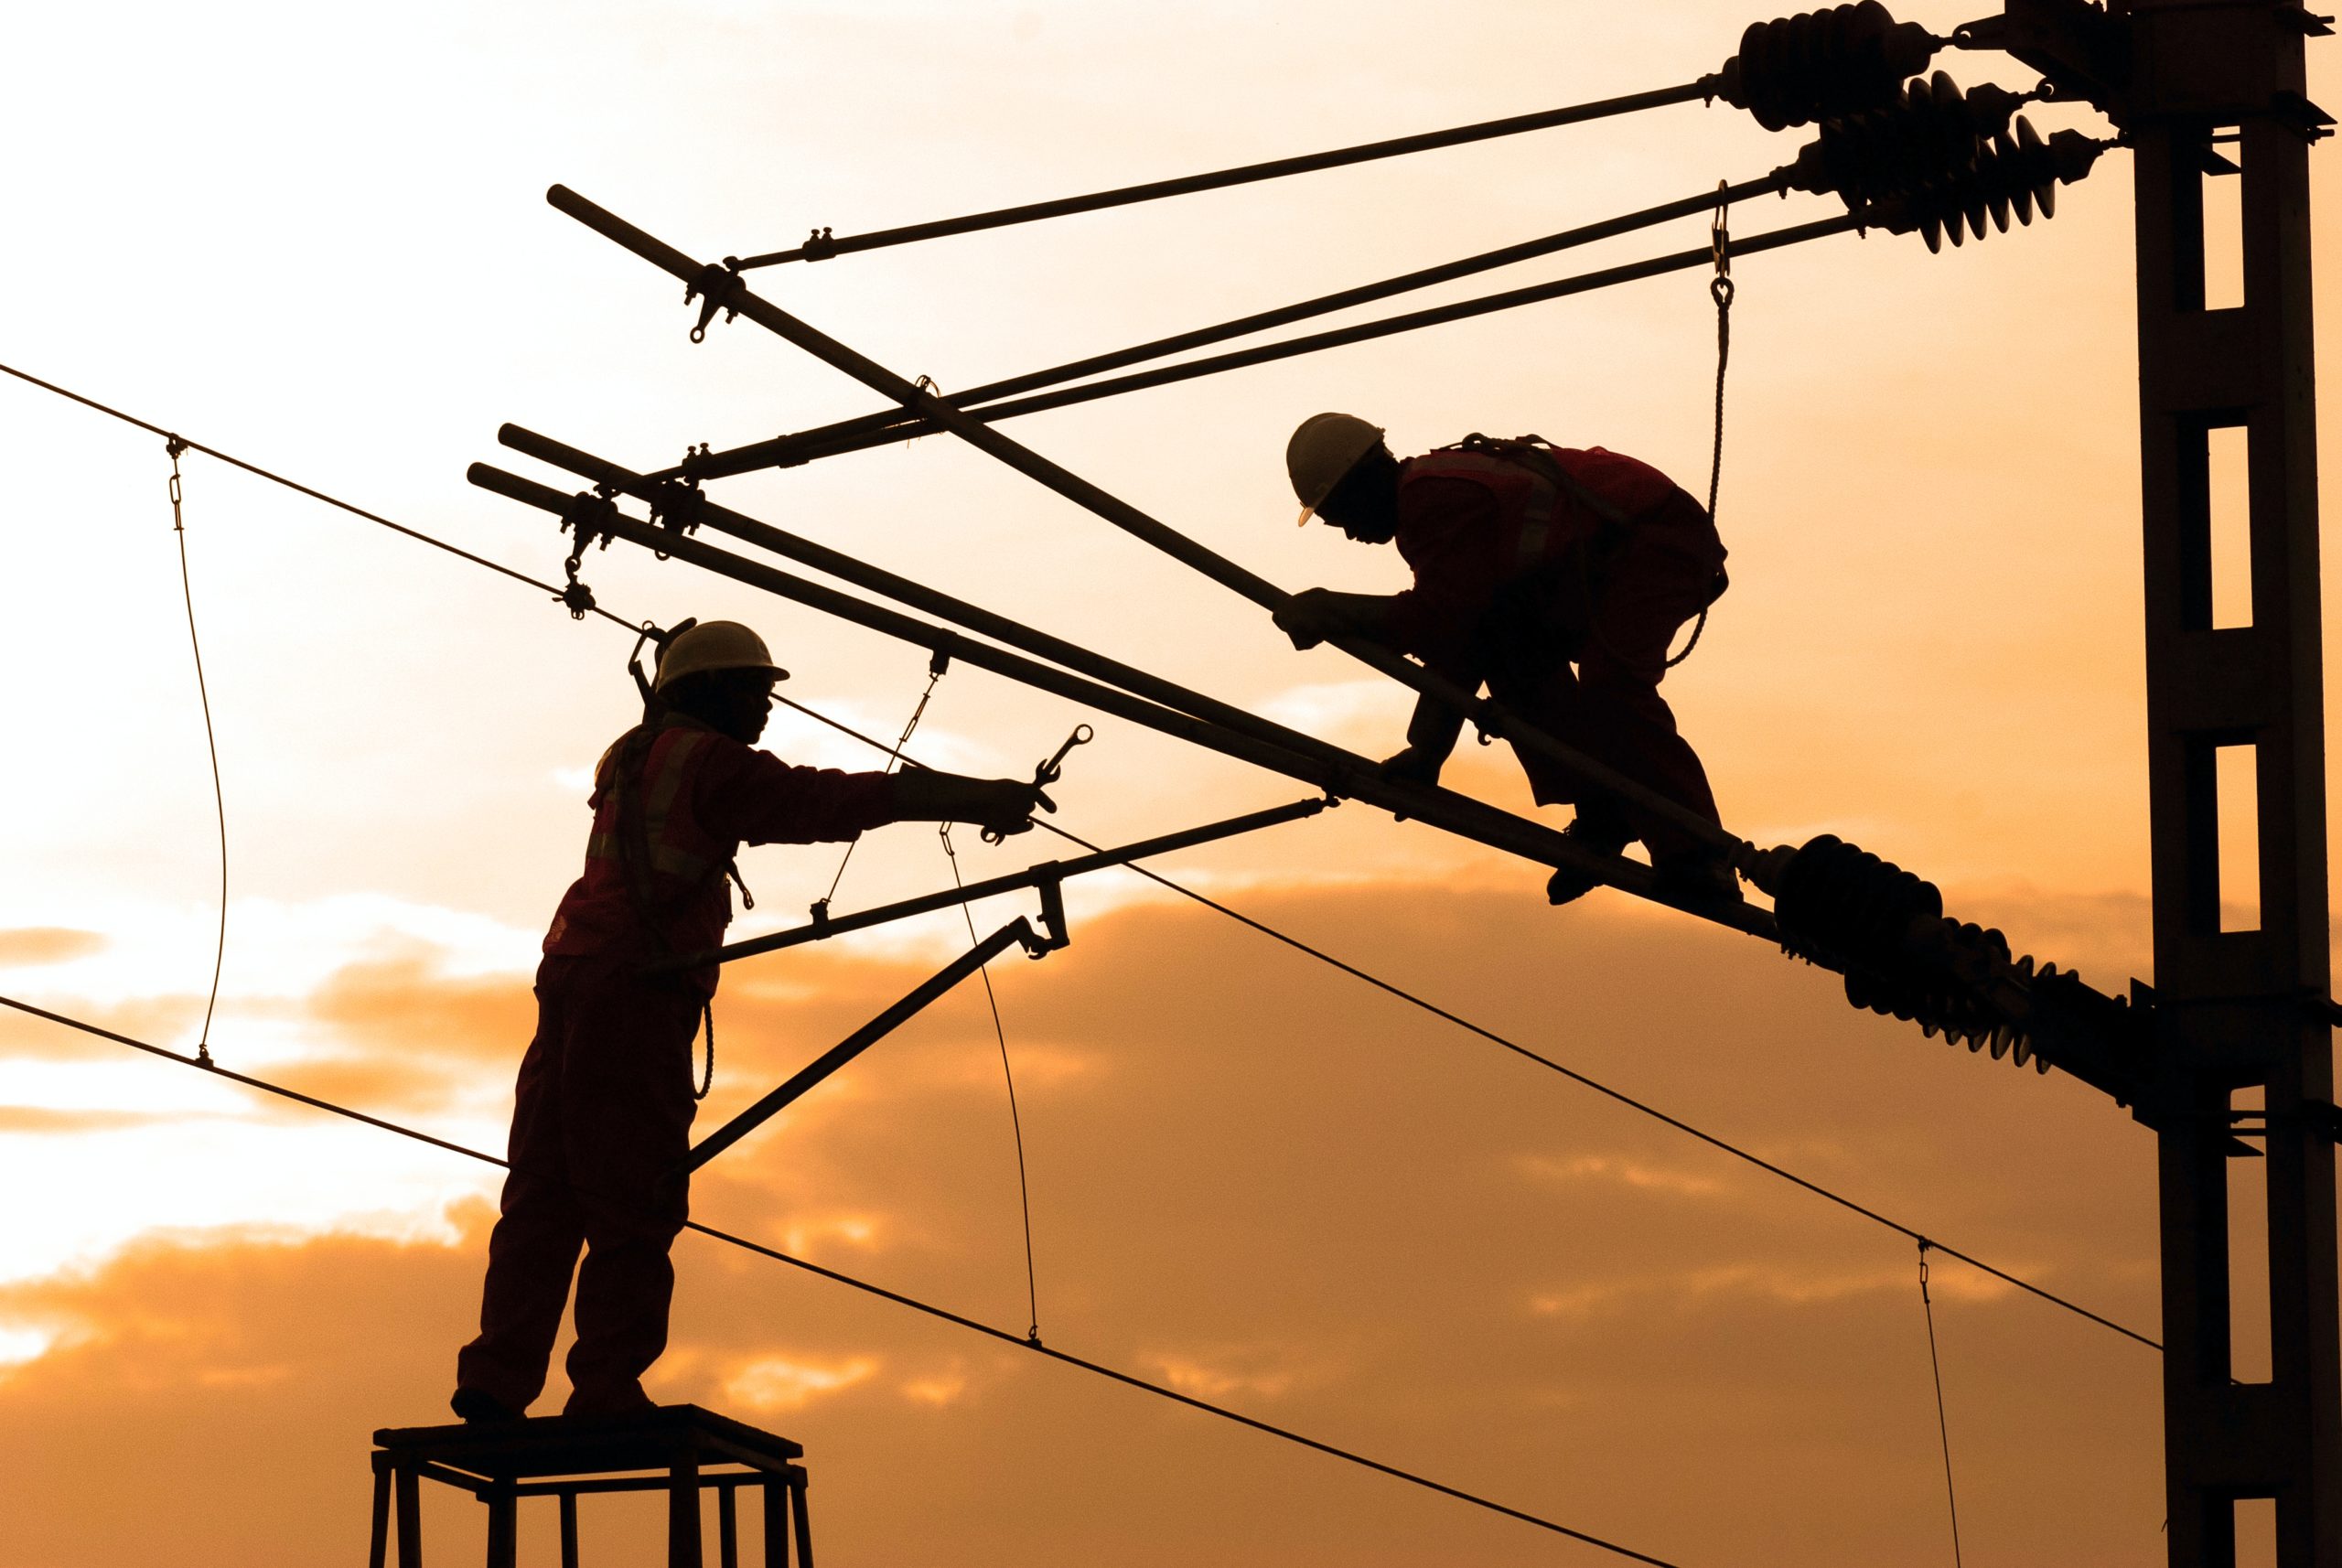 Electrical linemen working at sunset.